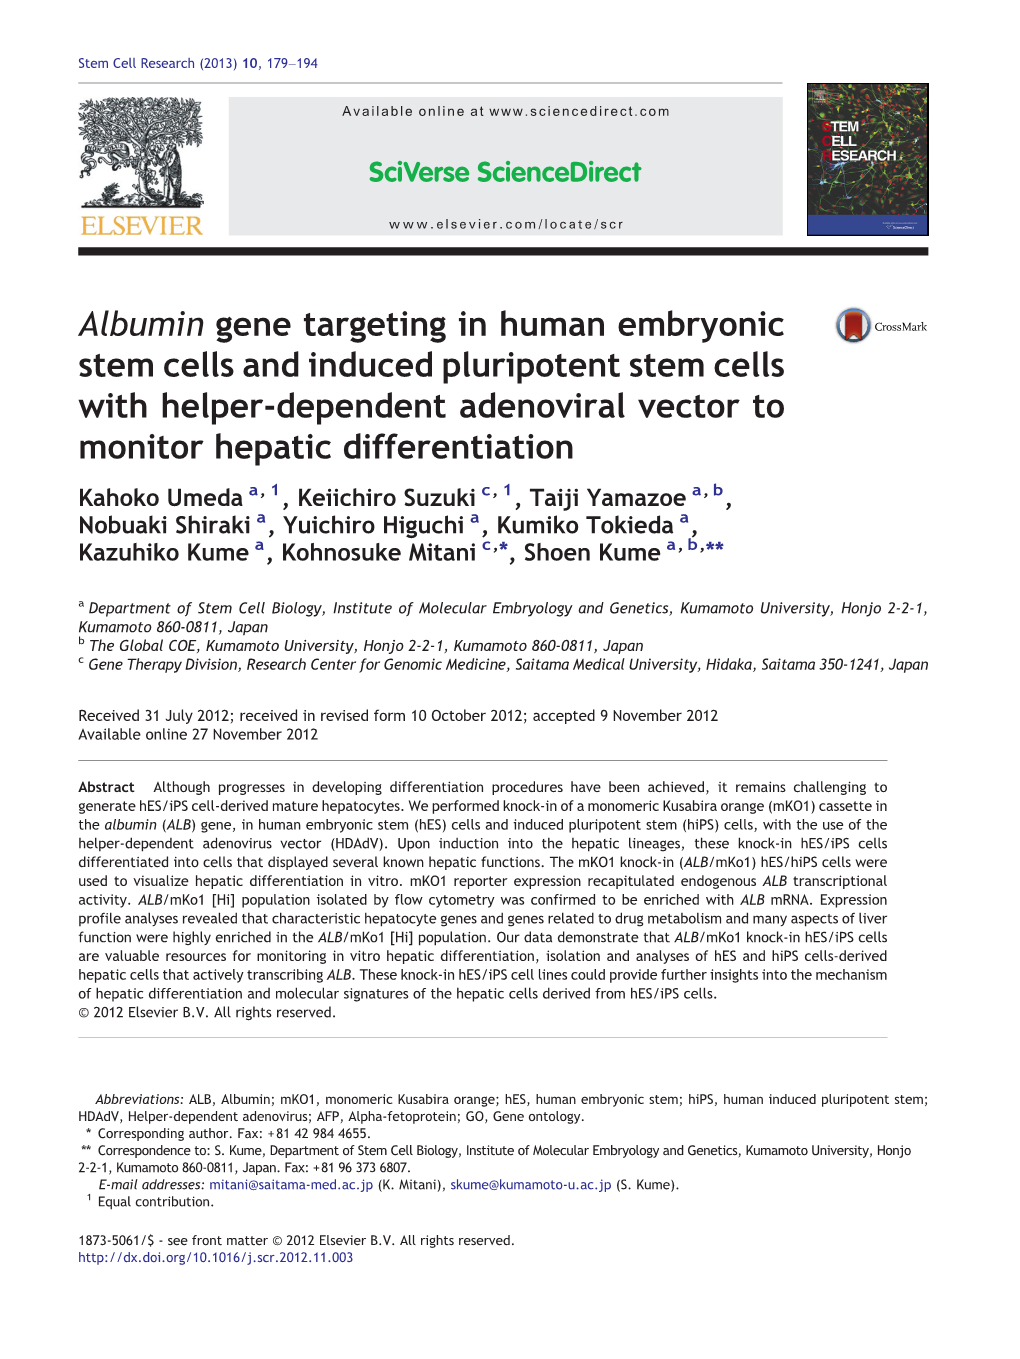 Albumin Gene Targeting in Human Embryonic Stem Cells and Induced